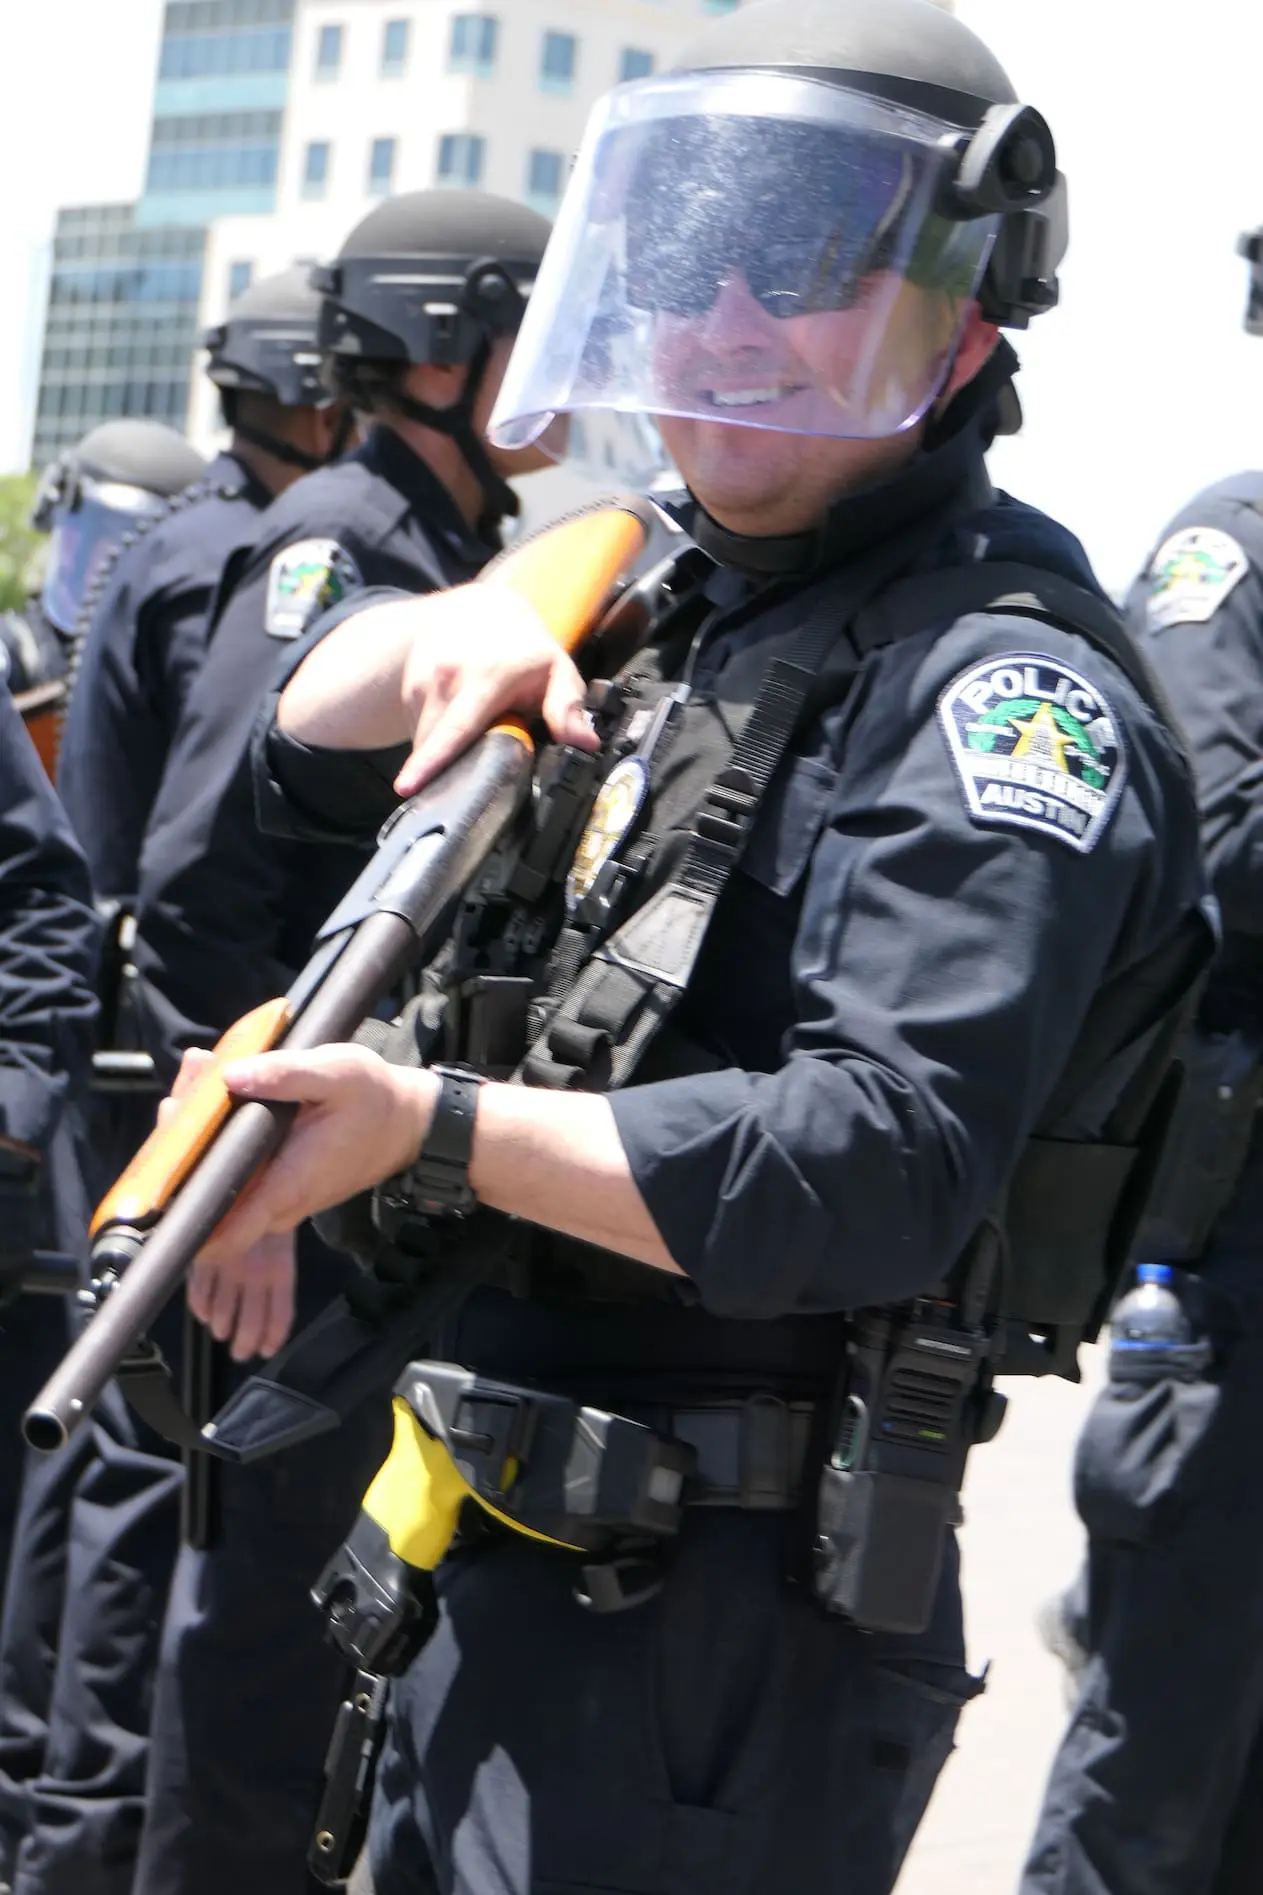 An Austin Police officer smells while holding a shotgun in a crowd of other officers.